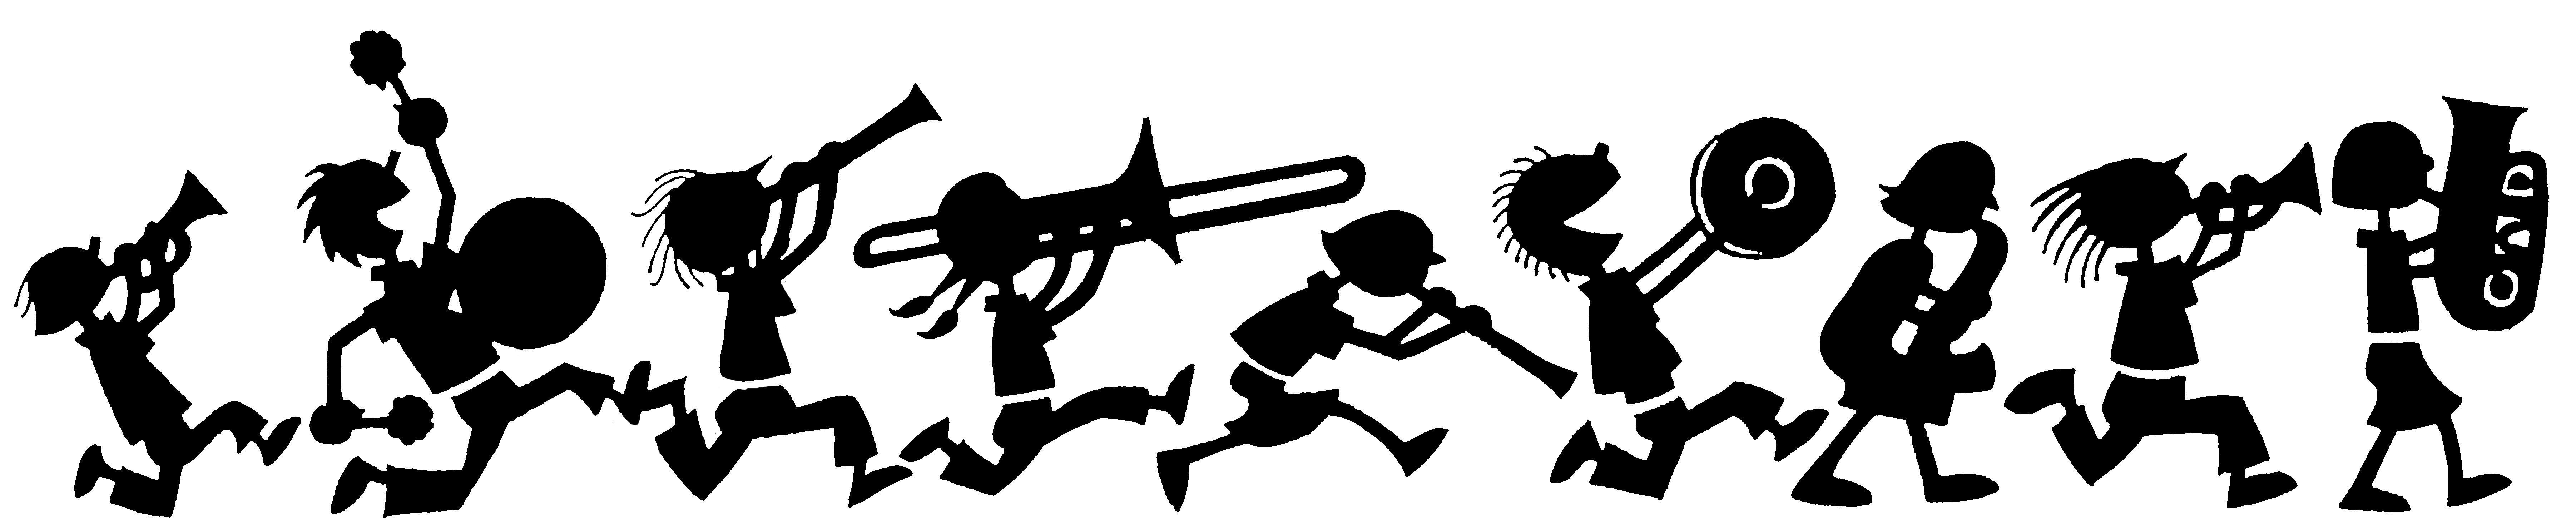 Cartoon Silhouette Marching Band / A vector silhouette illustration of ...